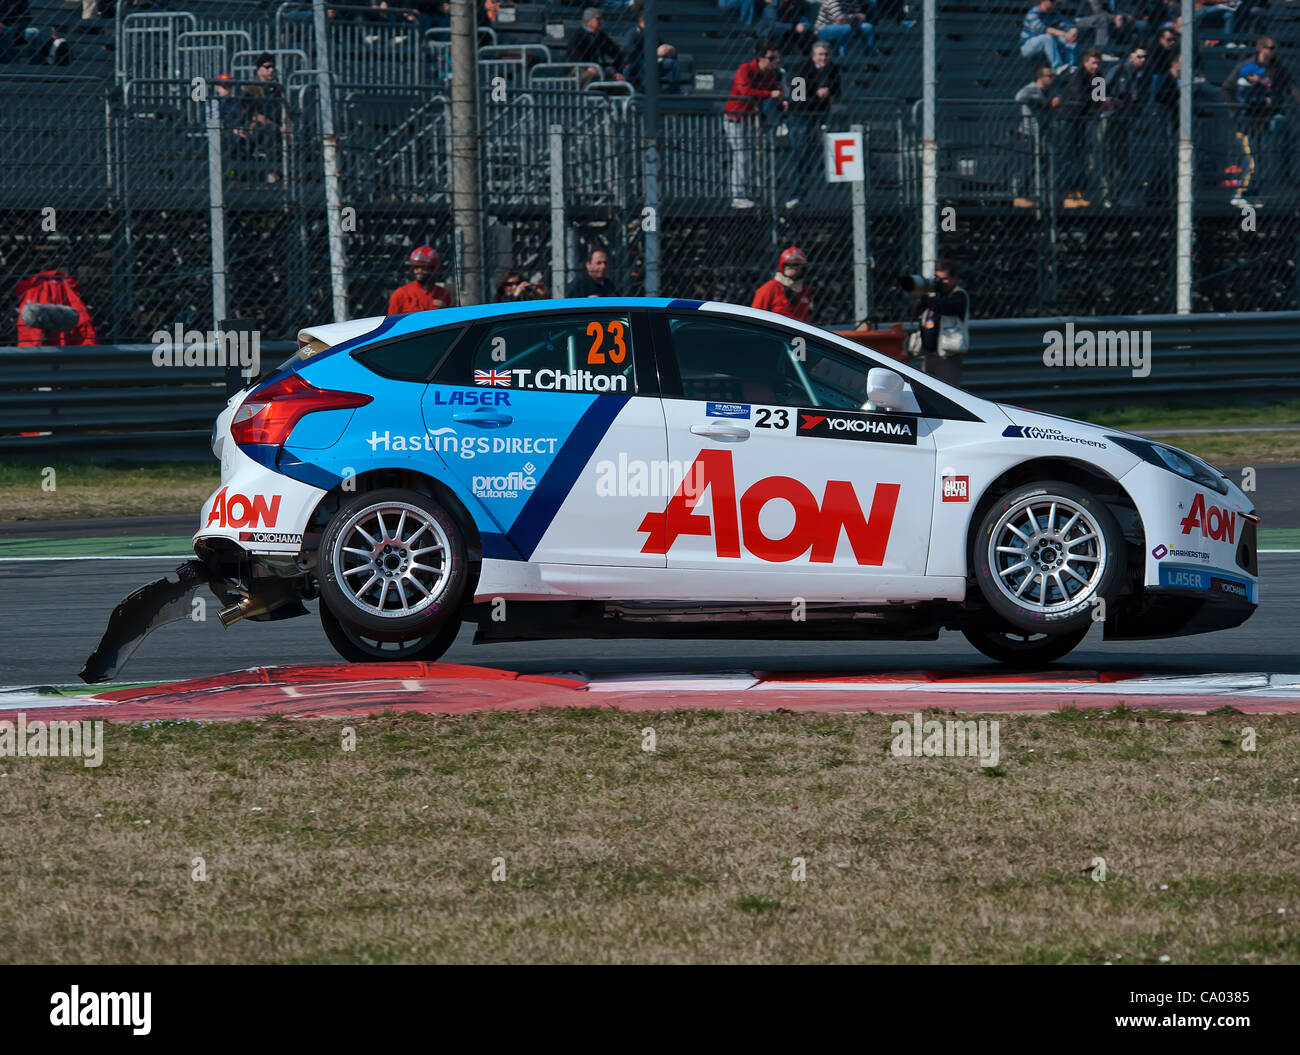 WTCC 2012 Race 1 Monza 11 th March 2012 Tom Chilton Ford Focus drives on two wheels Stock Photo